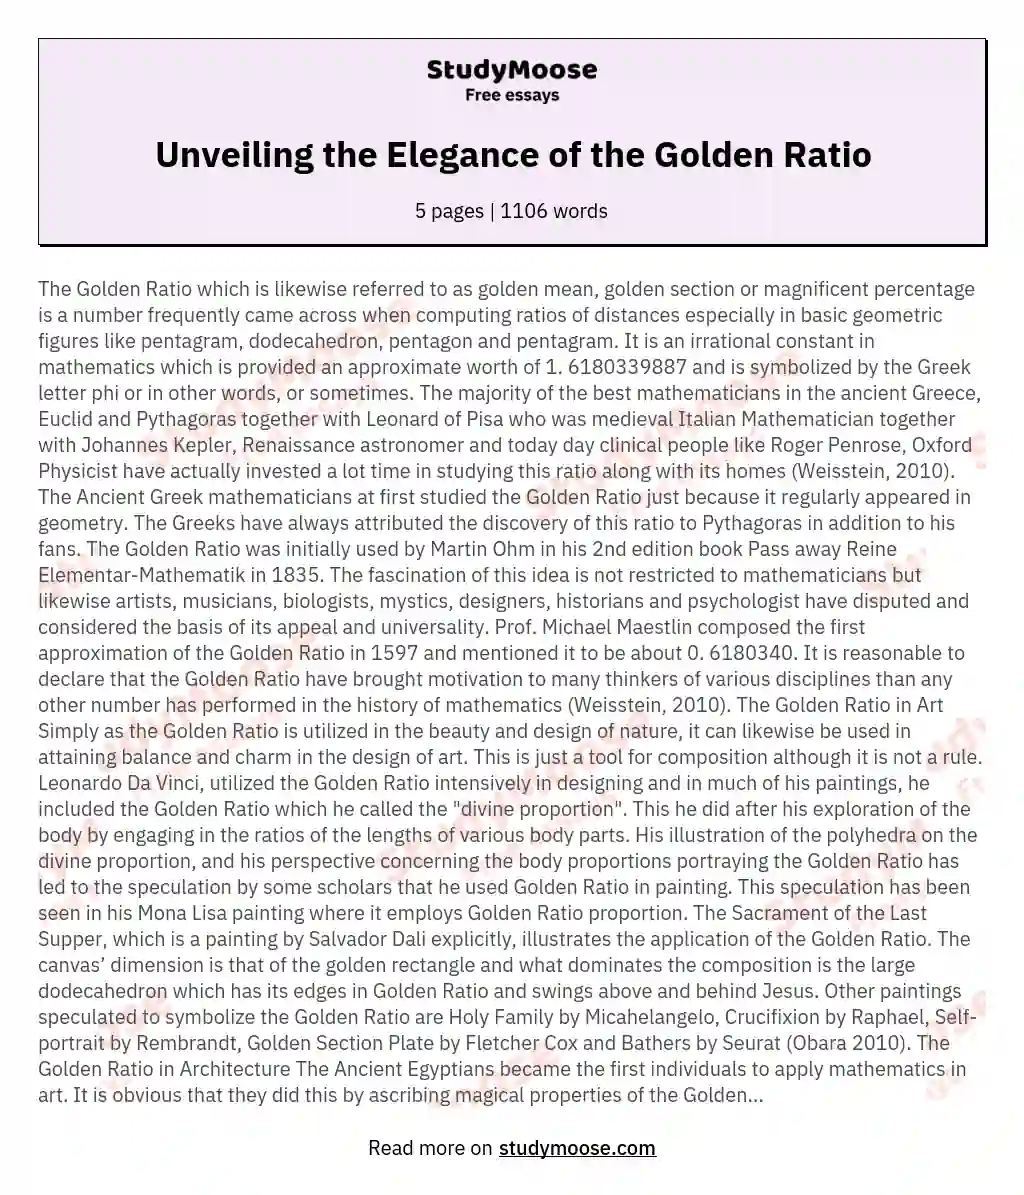 Unveiling the Elegance of the Golden Ratio essay